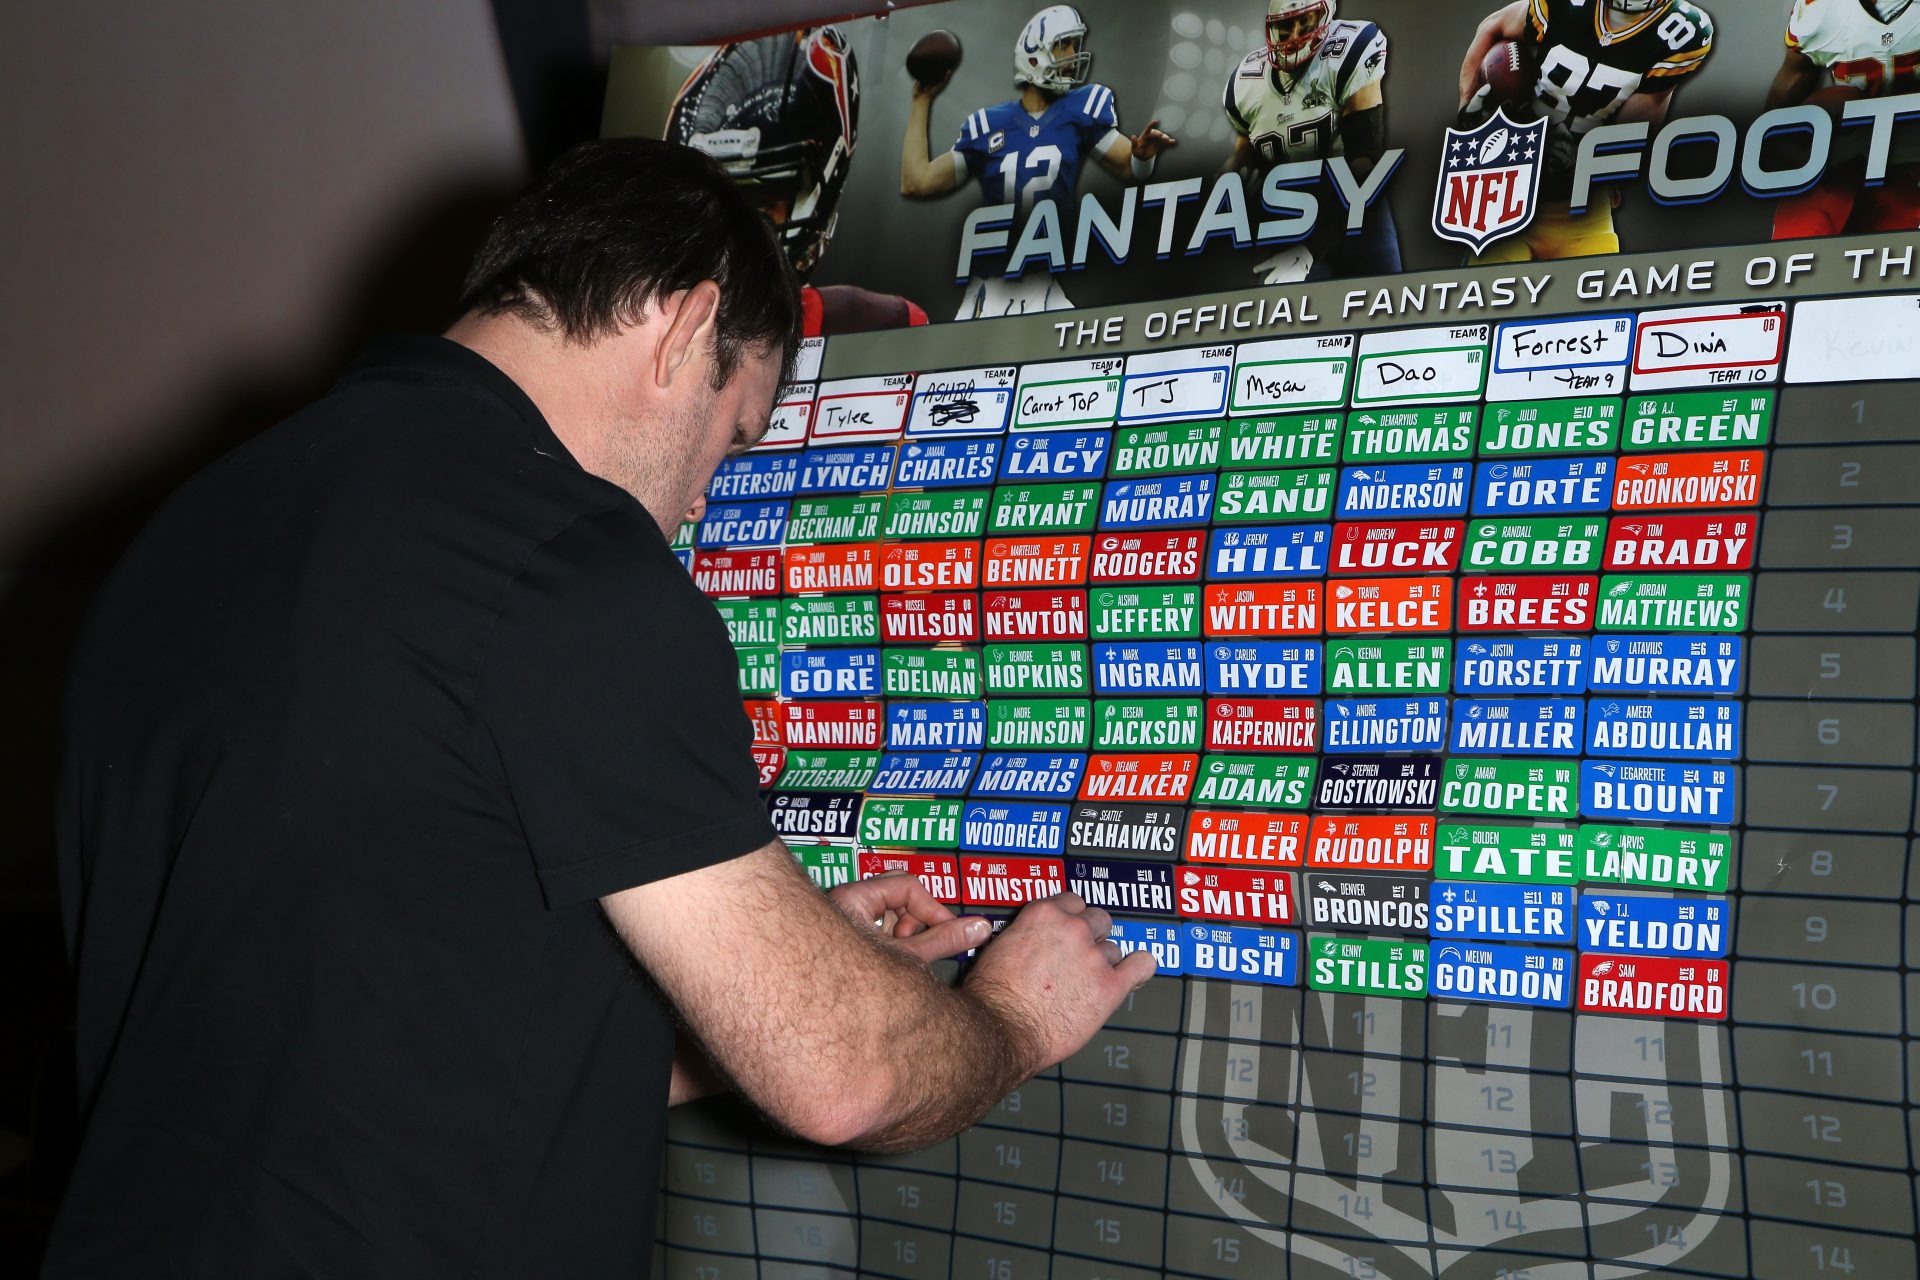 Crazy but real Fantasy Football punishments for last place finishers